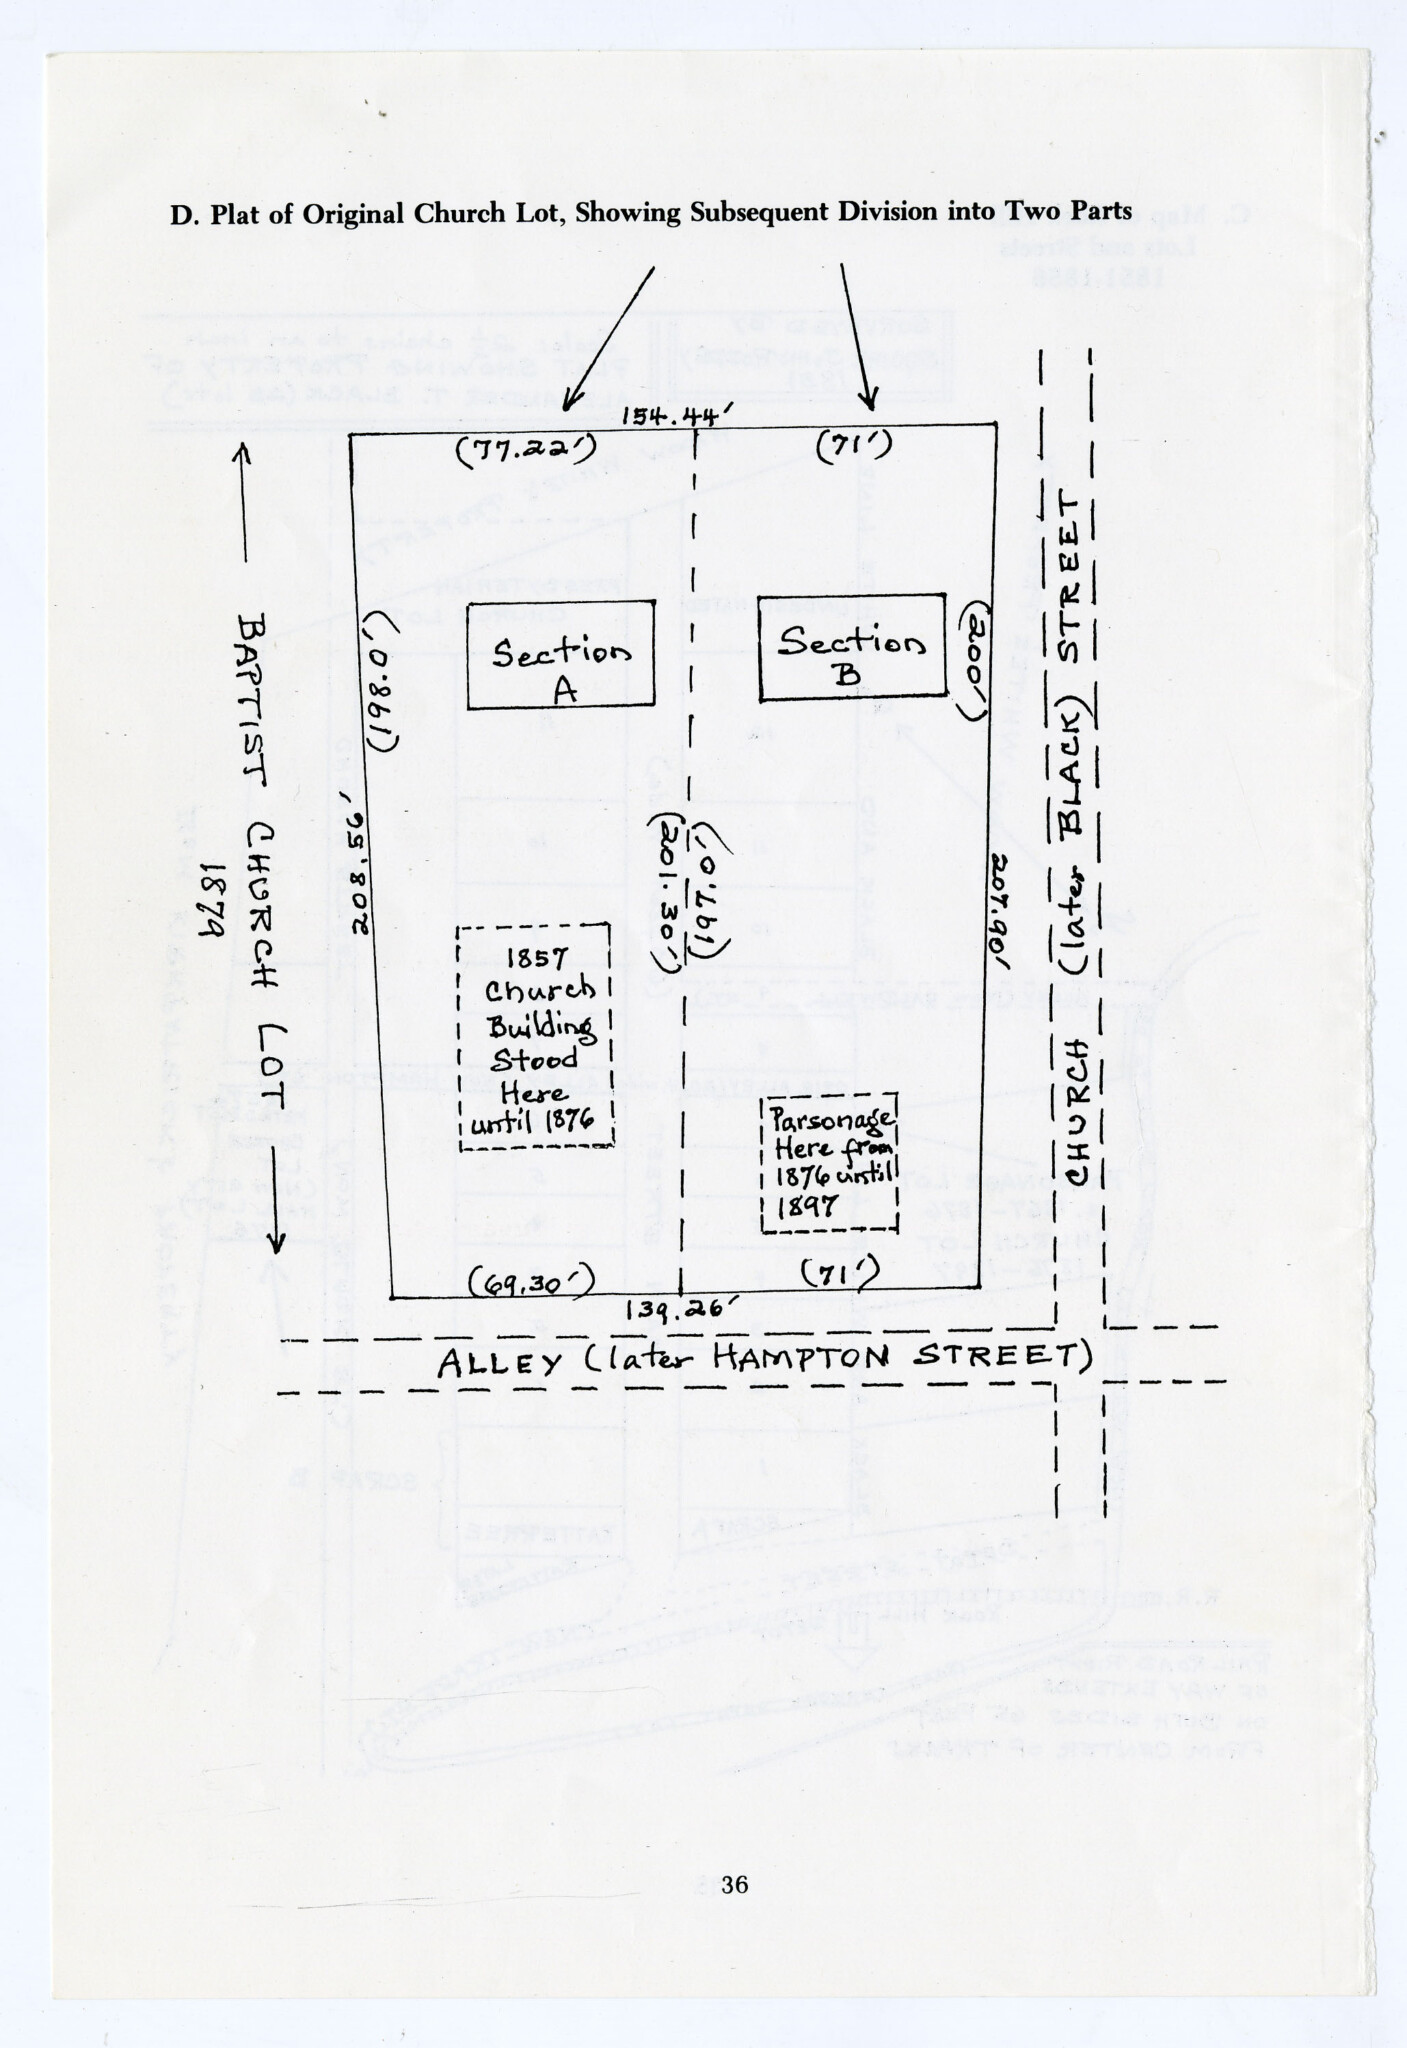 LAYOUT OF THE BAPTIST PROPERTY - WM. B. WHITE, JR. COLLECTION @ WU PETTUS ARCHIVES